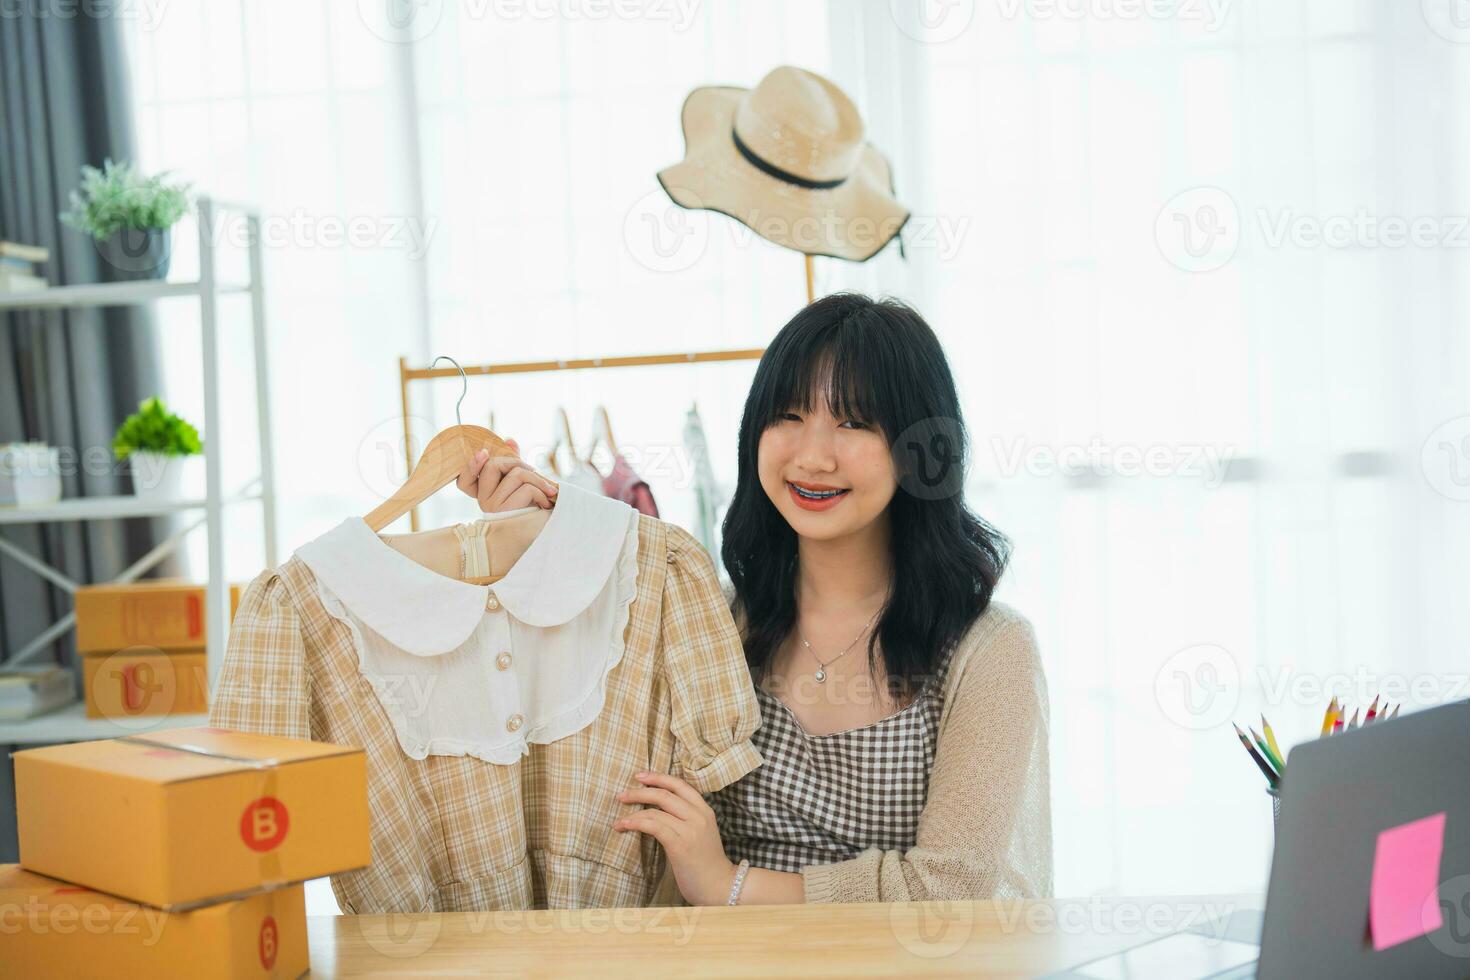 Asian woman steamming sell cloth shirt product online live at home. Young woman using mobile phone video call shows goods to customer and detail. Shopping online e-commerce buying and selling concept. photo